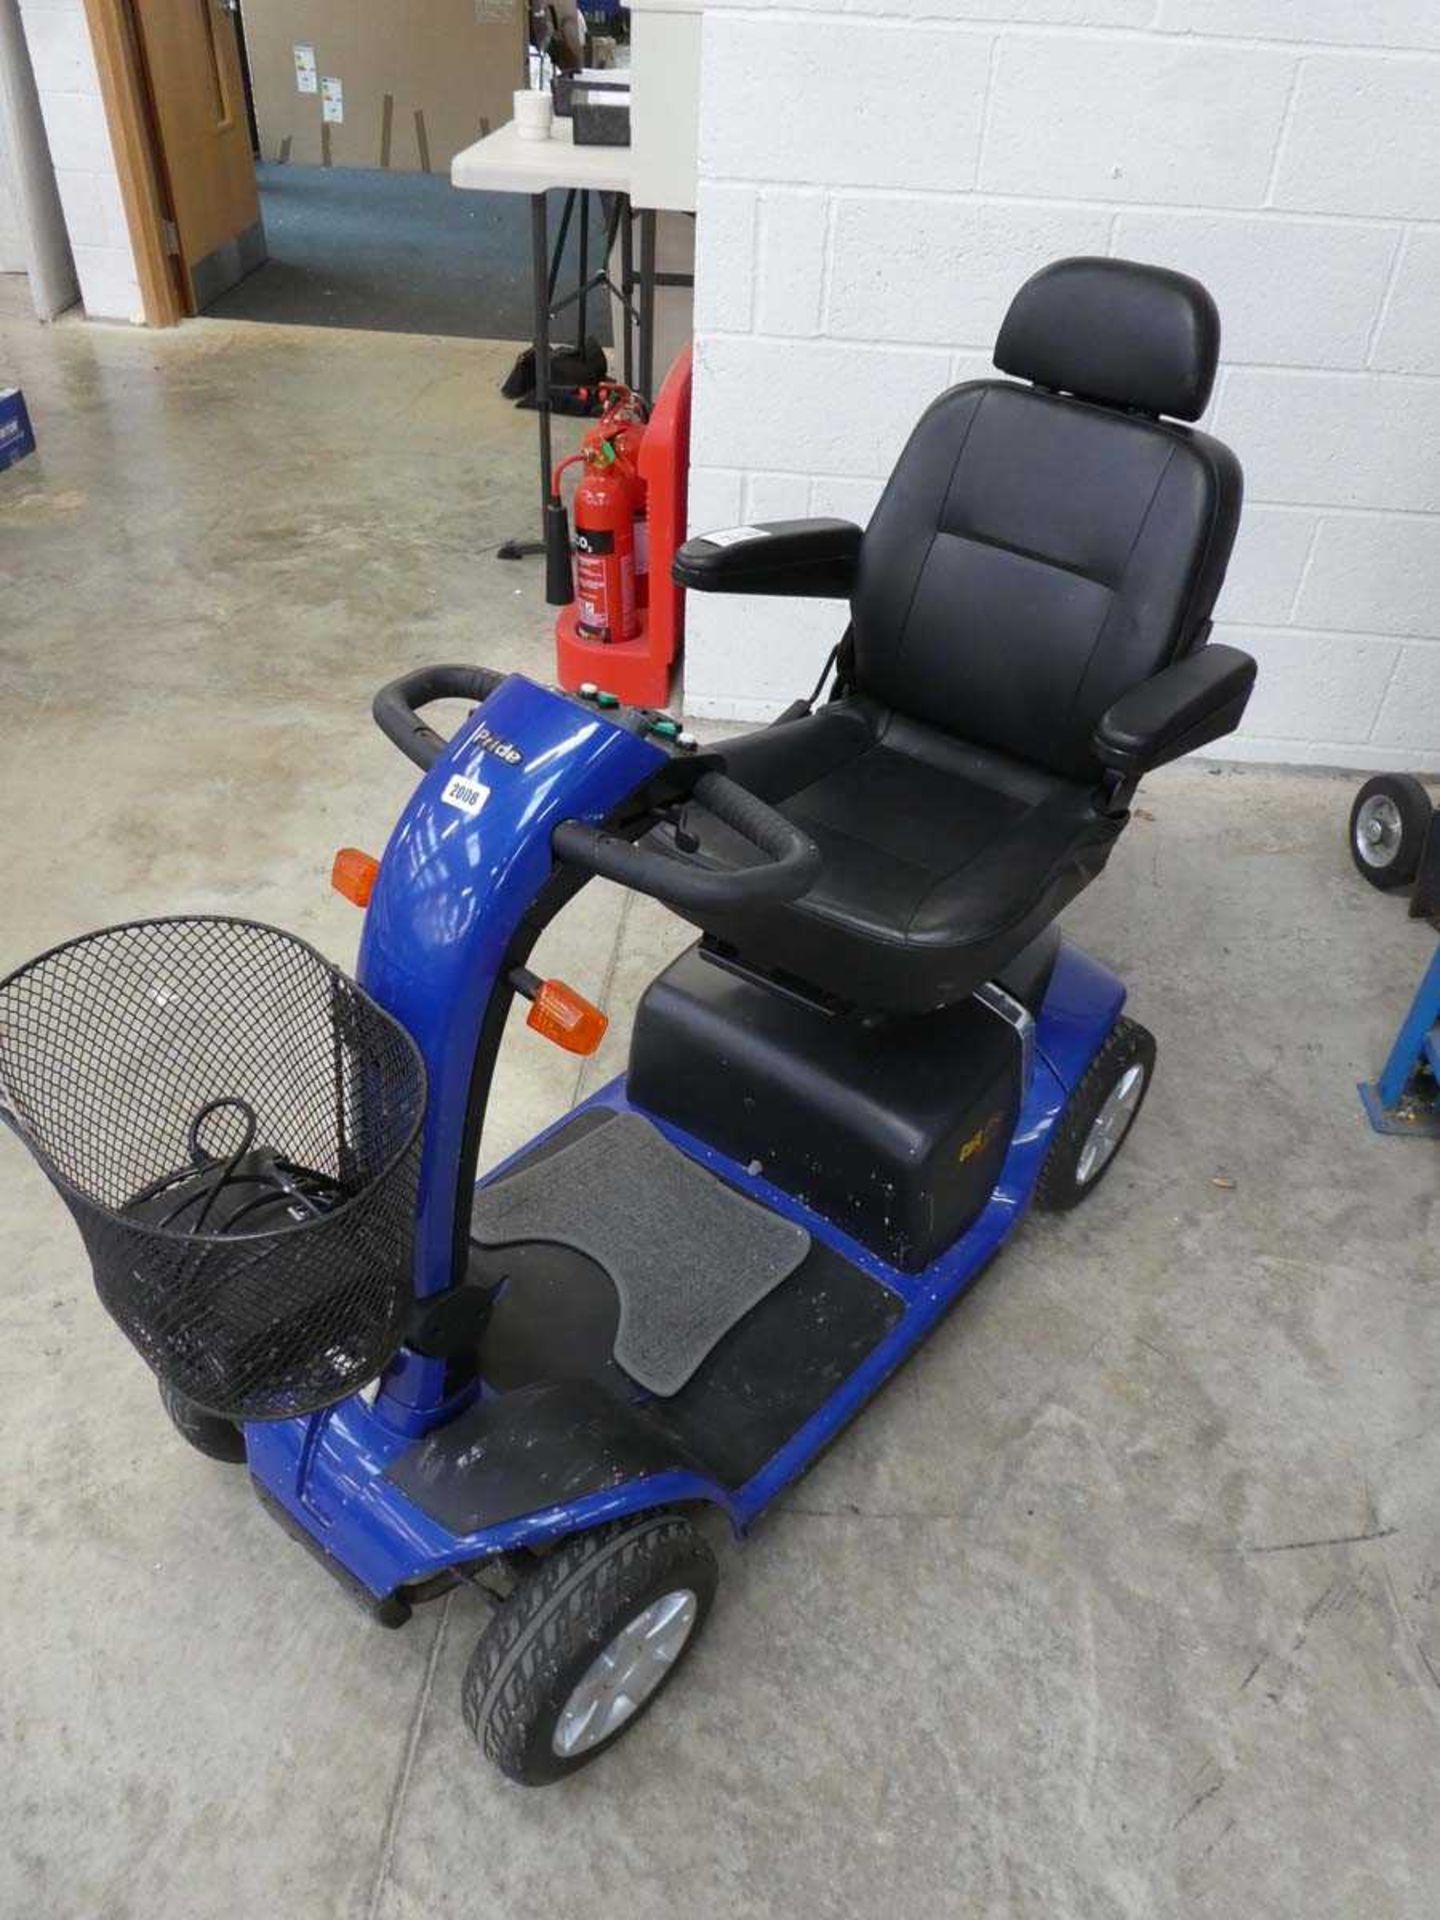 Colt Pride blue mobility scooter with key and charger - Image 4 of 6